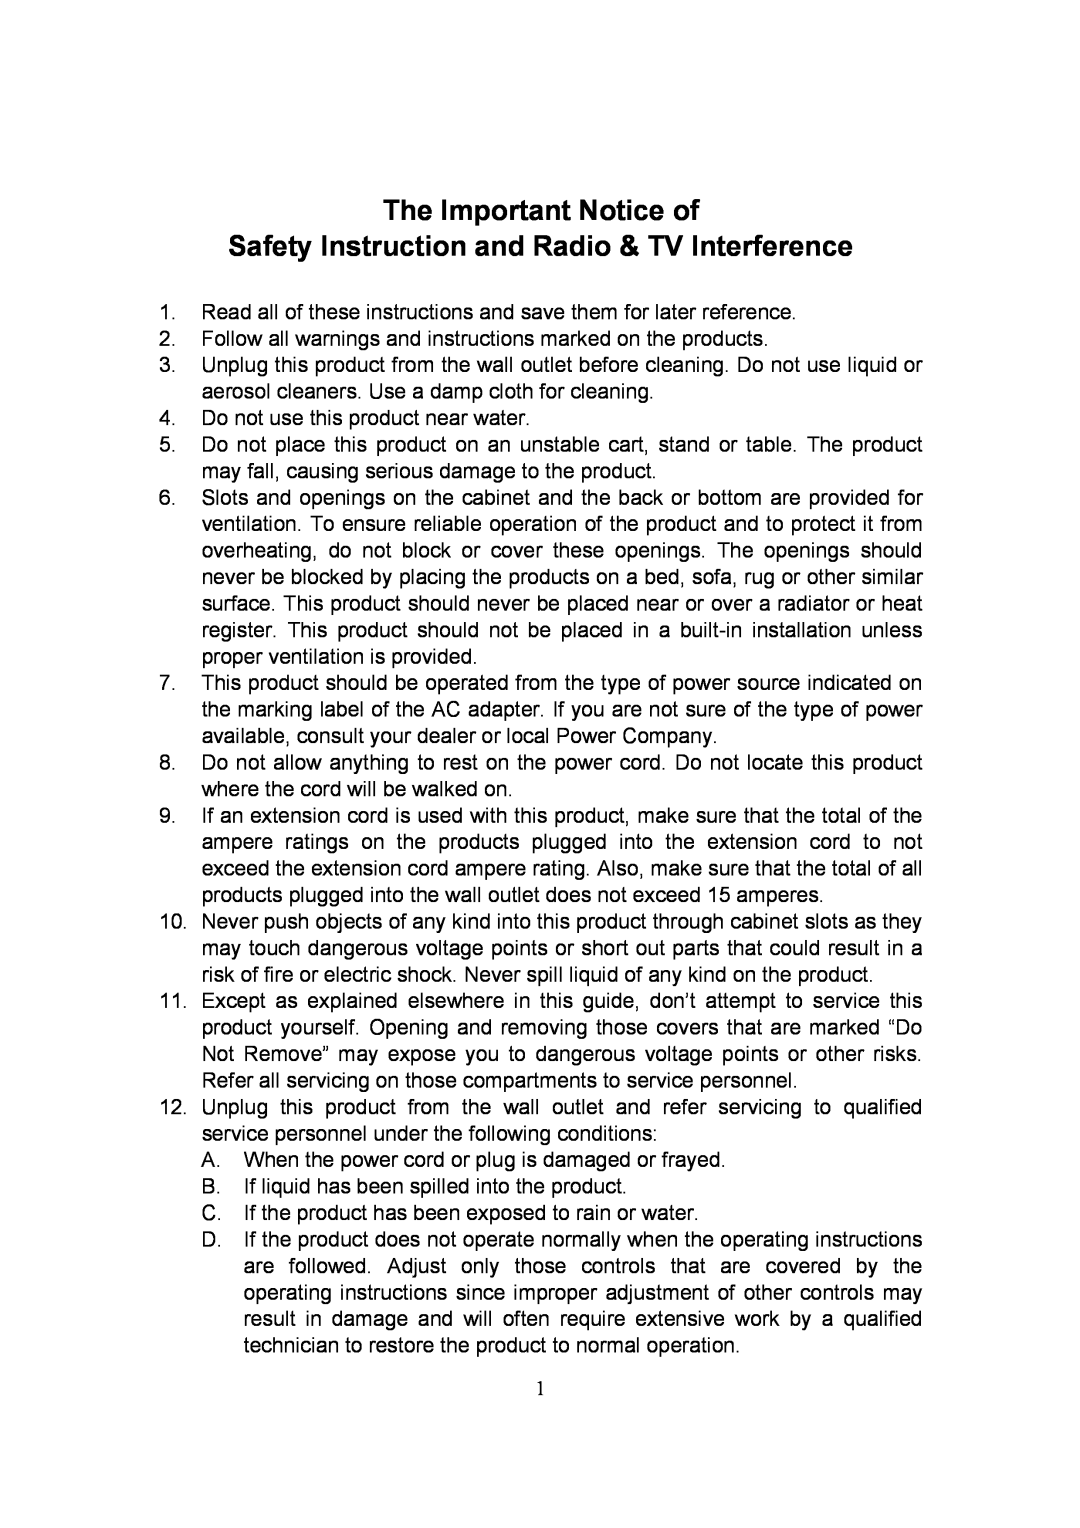 Datavideo CP-100 PRO instruction manual The Important Notice of, Safety Instruction and Radio & TV Interference 